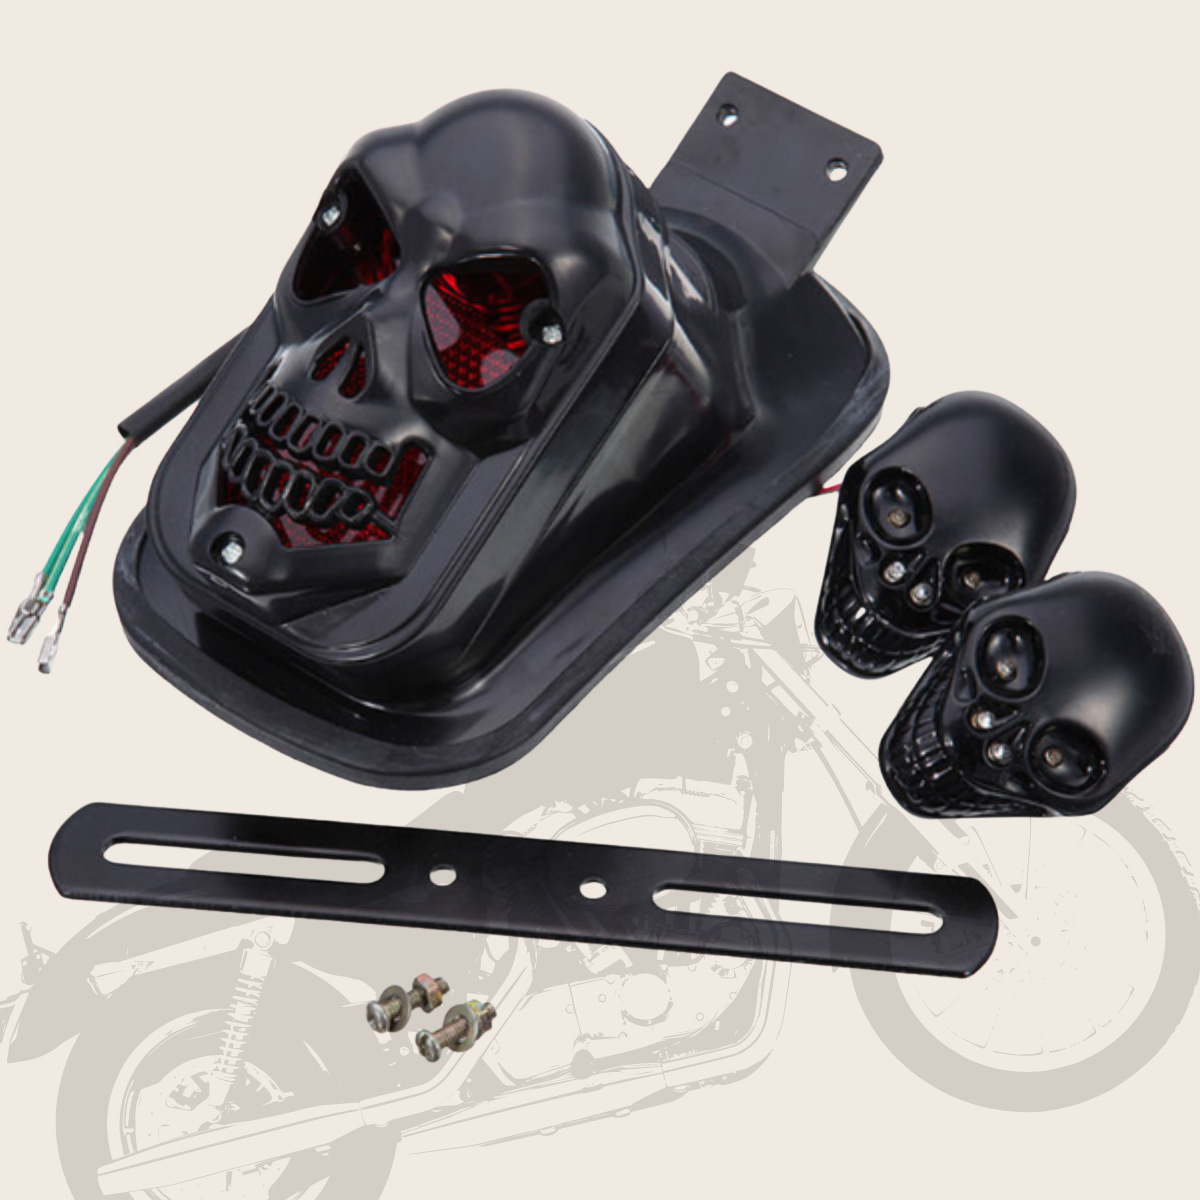 A motorcycle with a skull headlight and other accessories such as Motorcycle Skull Tail Lights with Turn Signals.